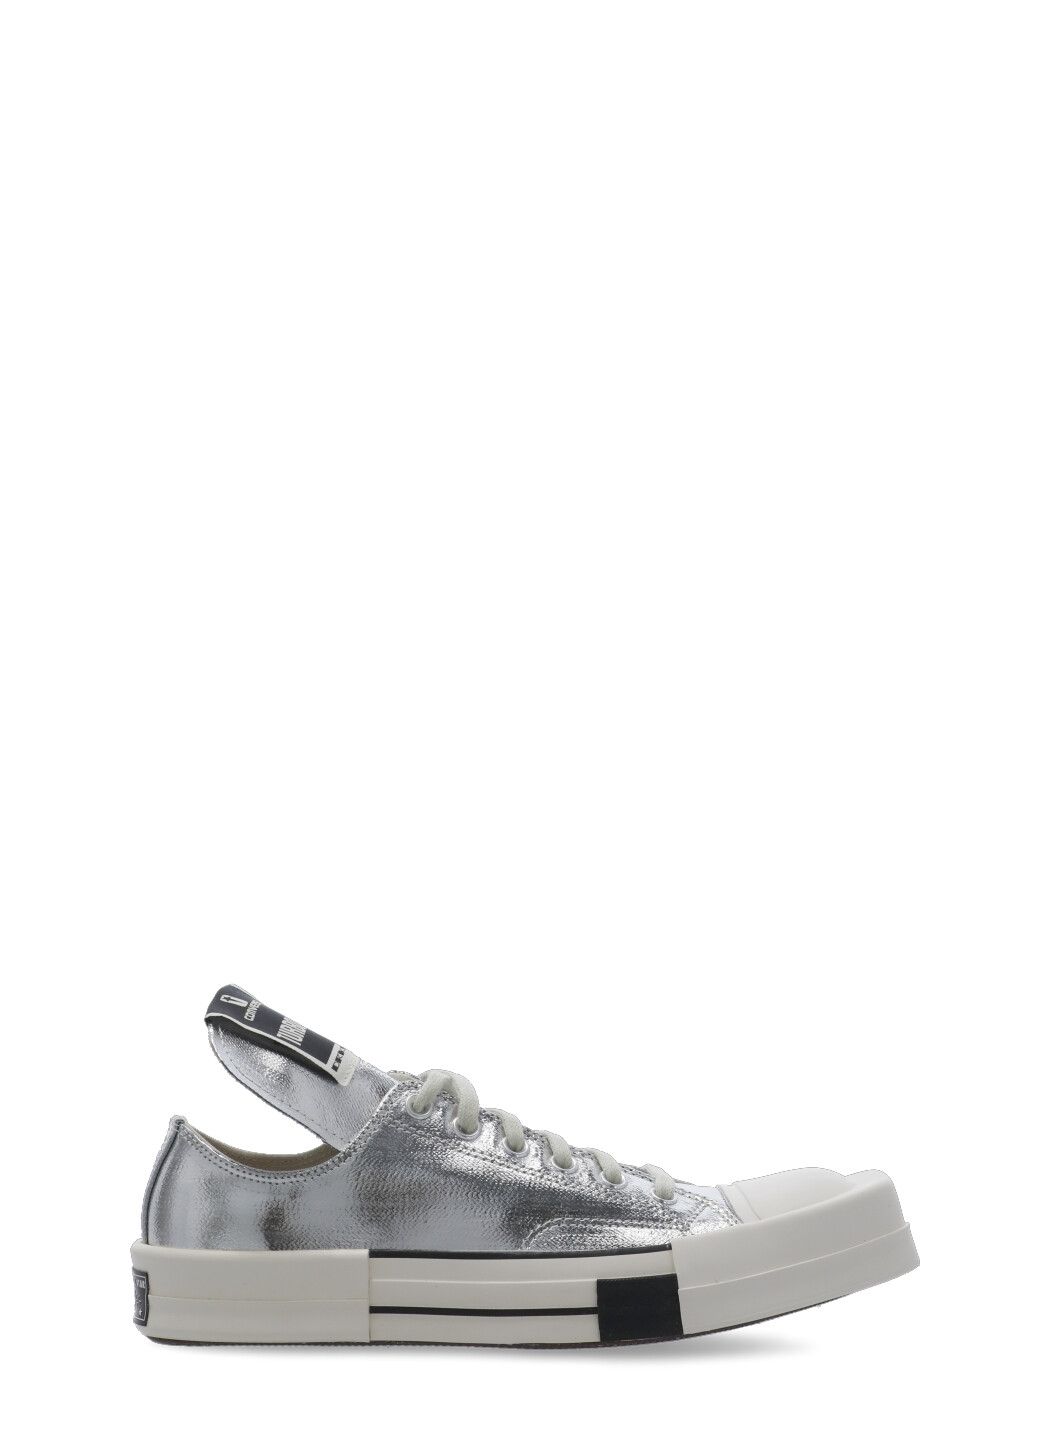 Converse x Rick Owens:TurboDRX sneakers